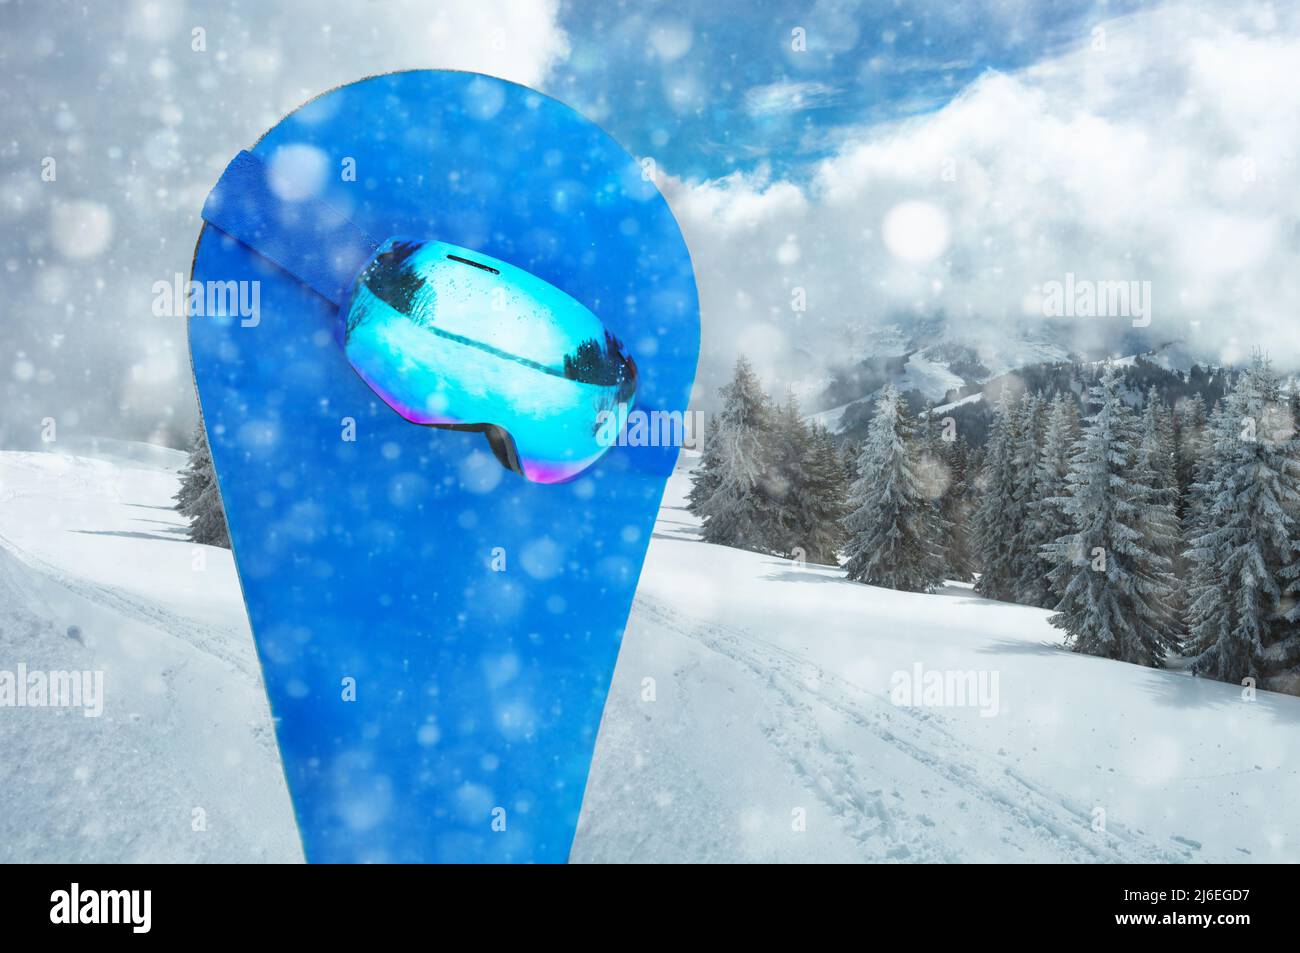 Ski sport mask close-up on blue snowboard over mountain track Stock Photo